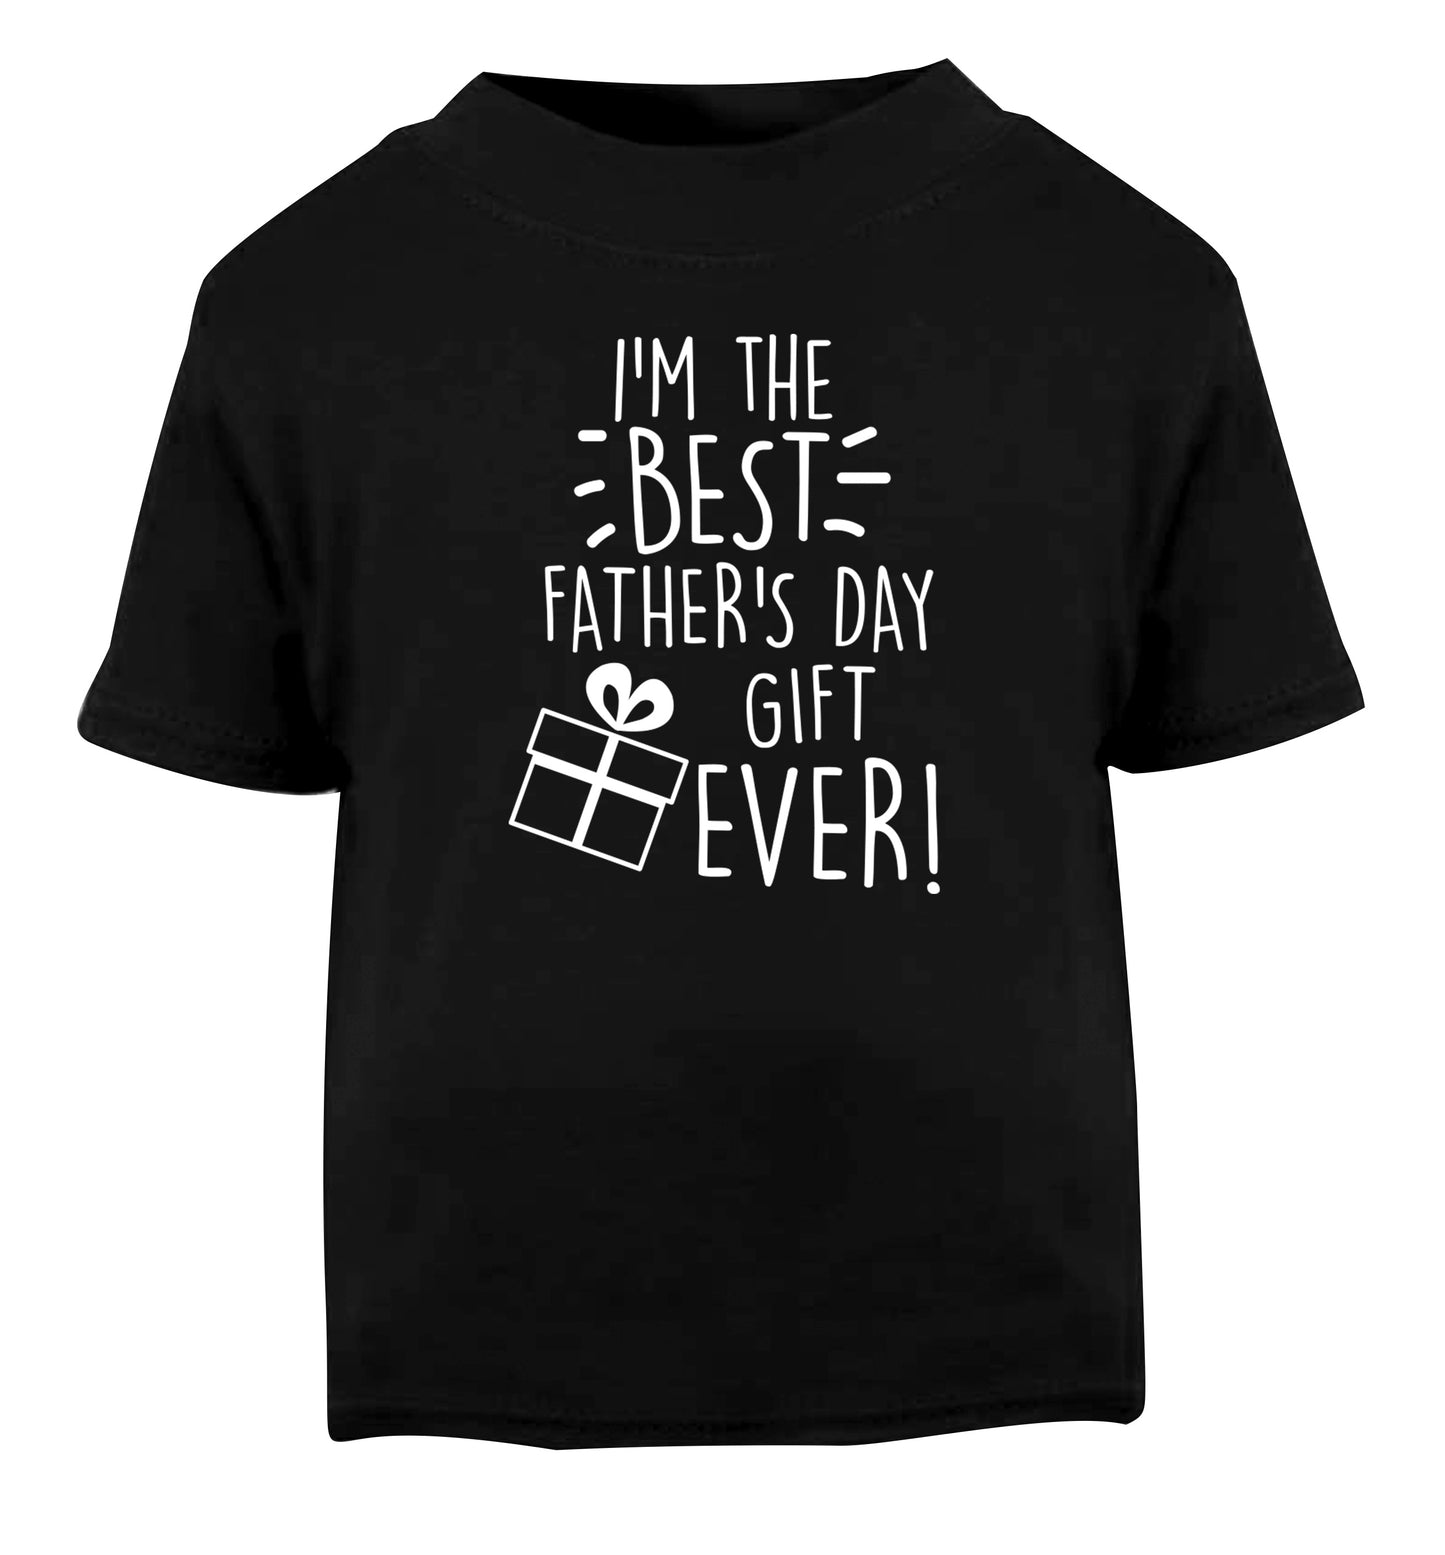 I'm the BEST father's day gift ever! Black Baby Toddler Tshirt 2 years